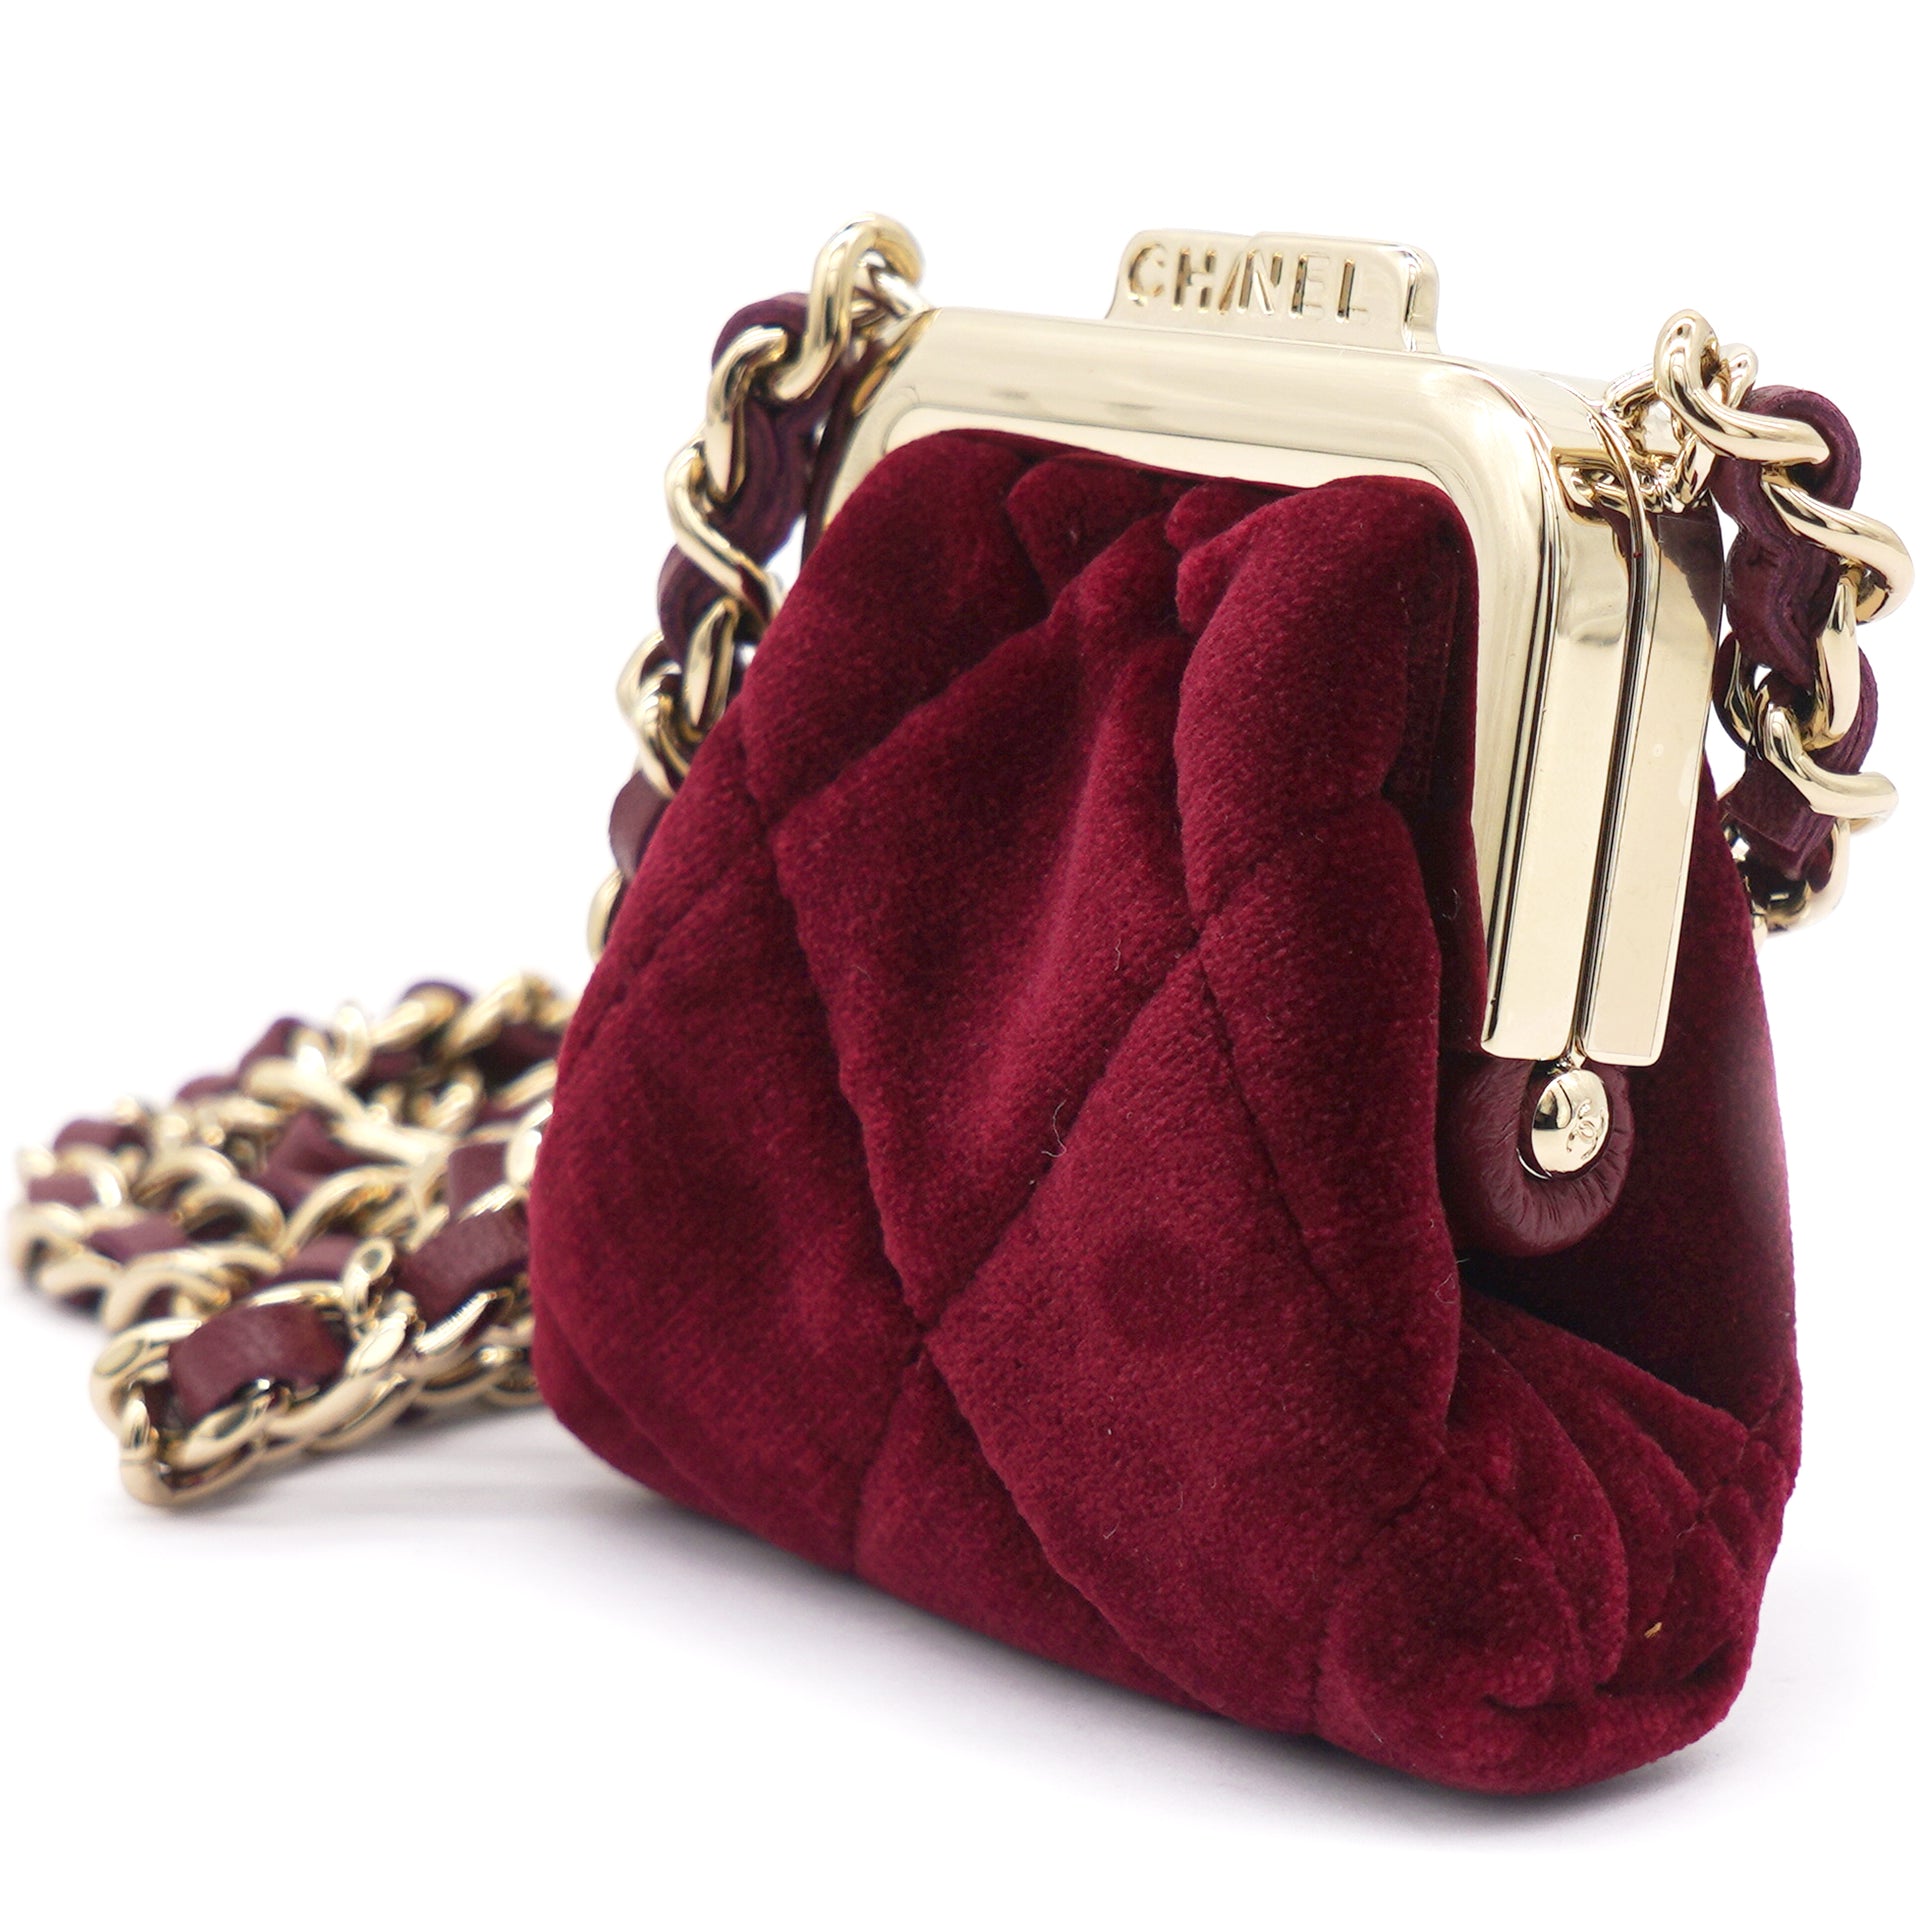 Chanel Red Velvet Clutch with Chain – STYLISHTOP